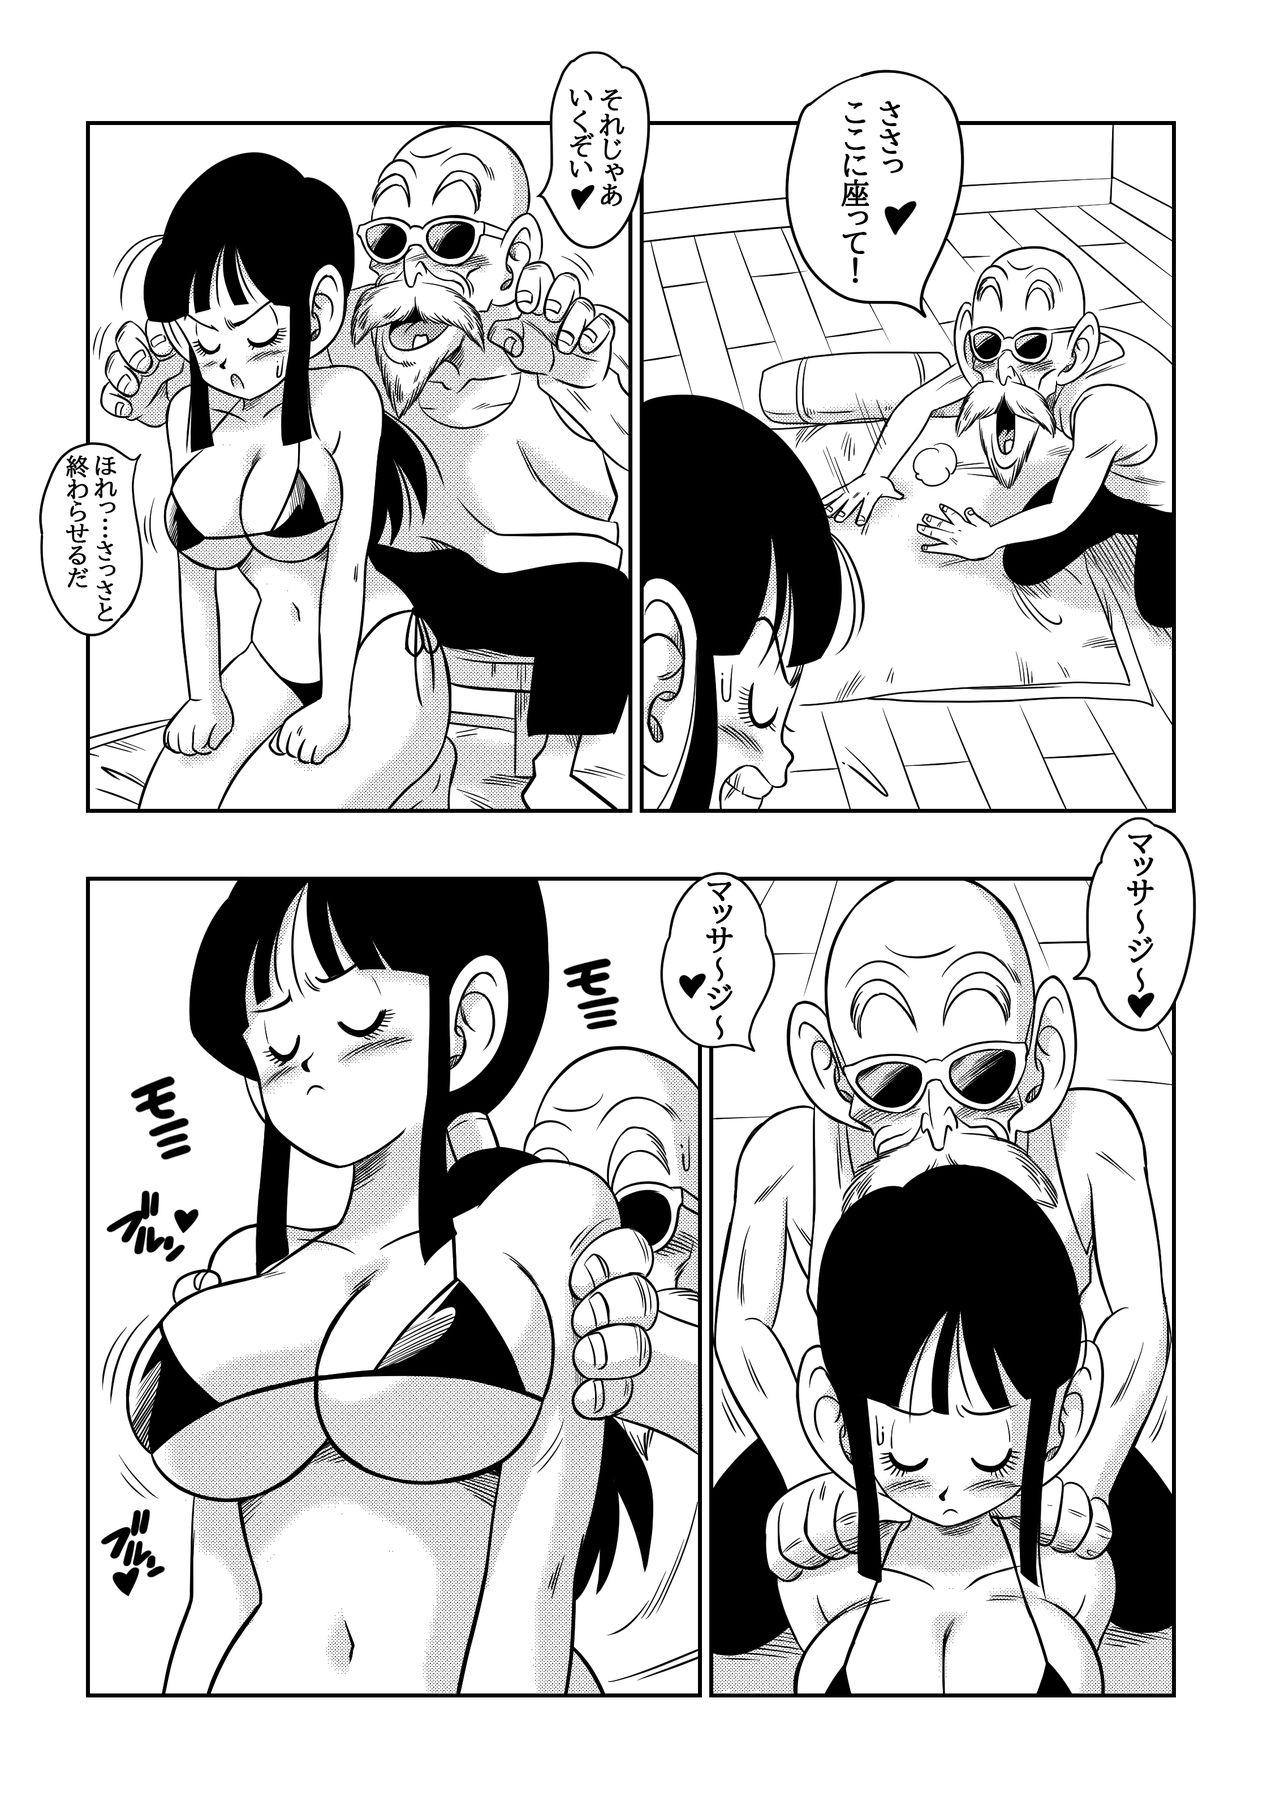 Erotic "An Ancient Tradition" - Young Wife is Harassed! - Dragon ball z Missionary Position Porn - Page 8